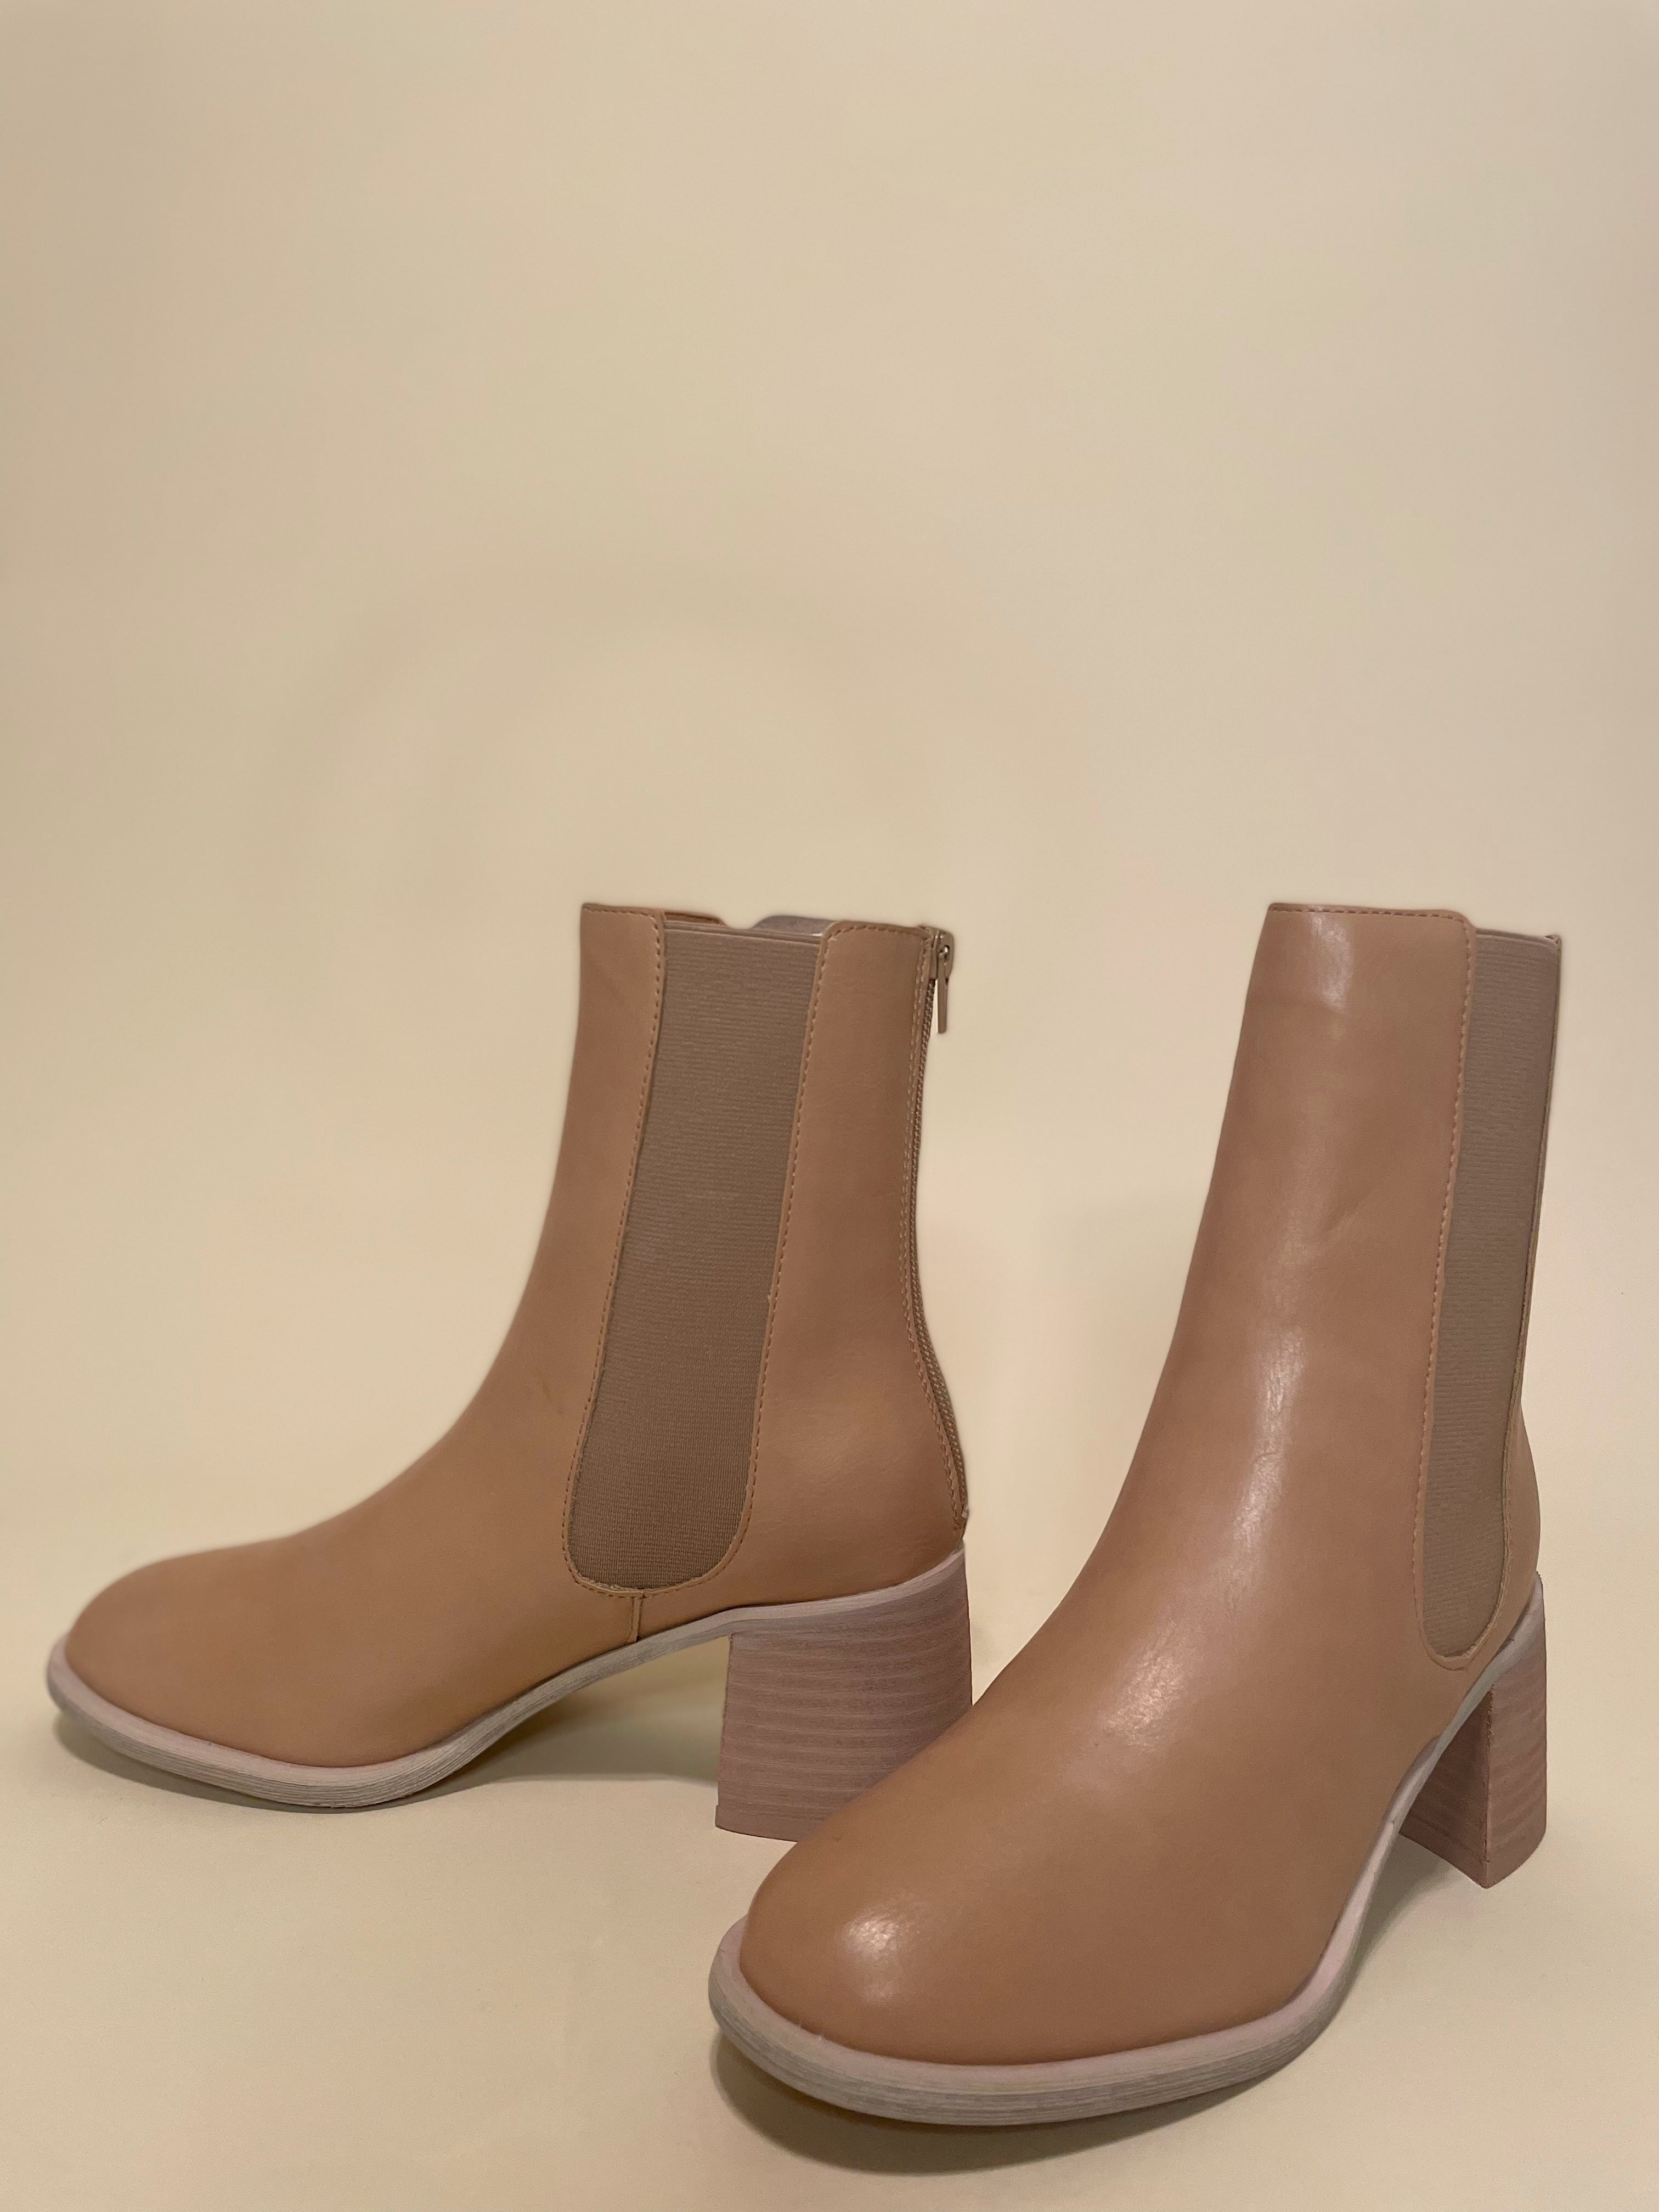 Cora Tall Ankle Booties